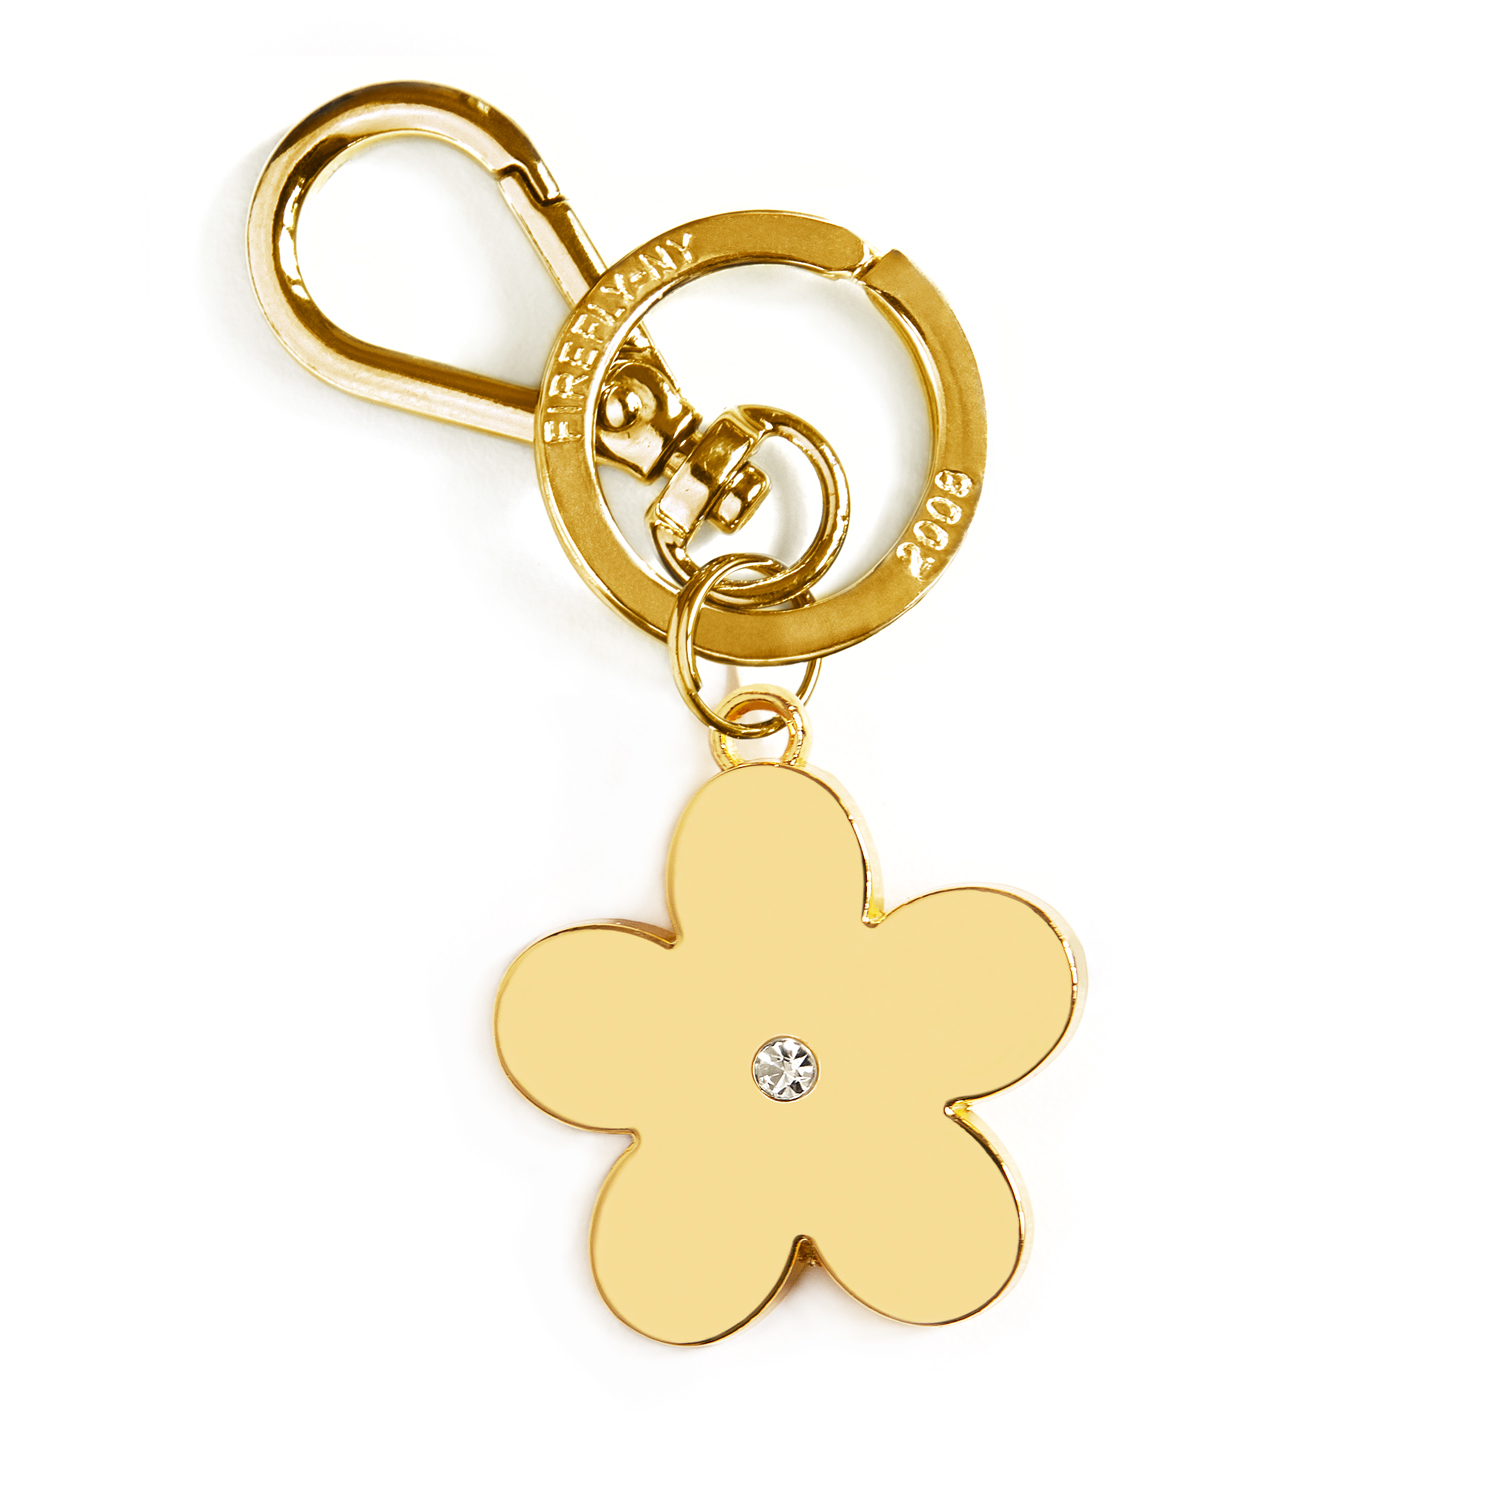 Flower Charm Keychain Hollow Out Key Ring Customizable Bag